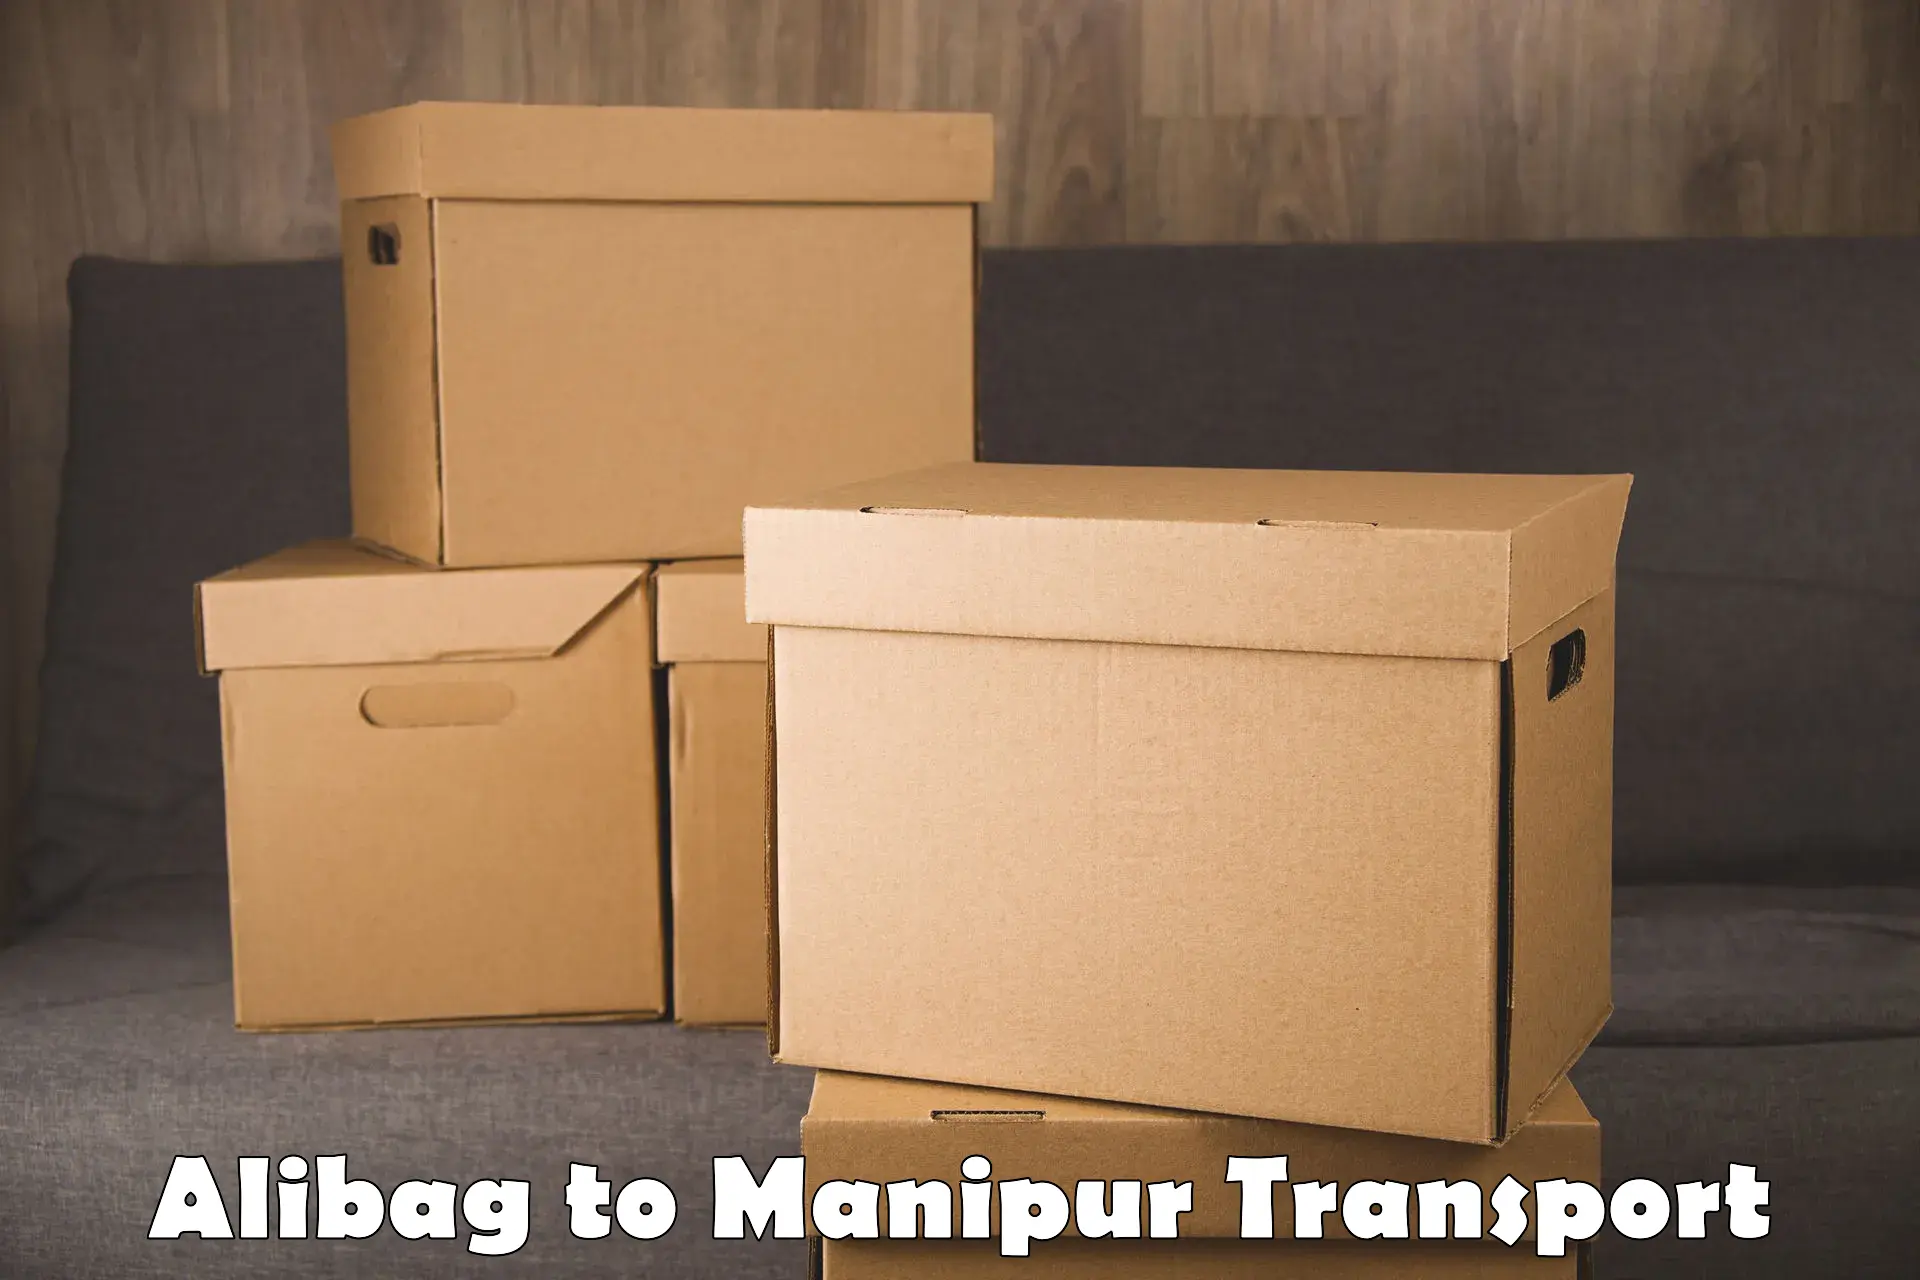 Container transport service Alibag to Manipur